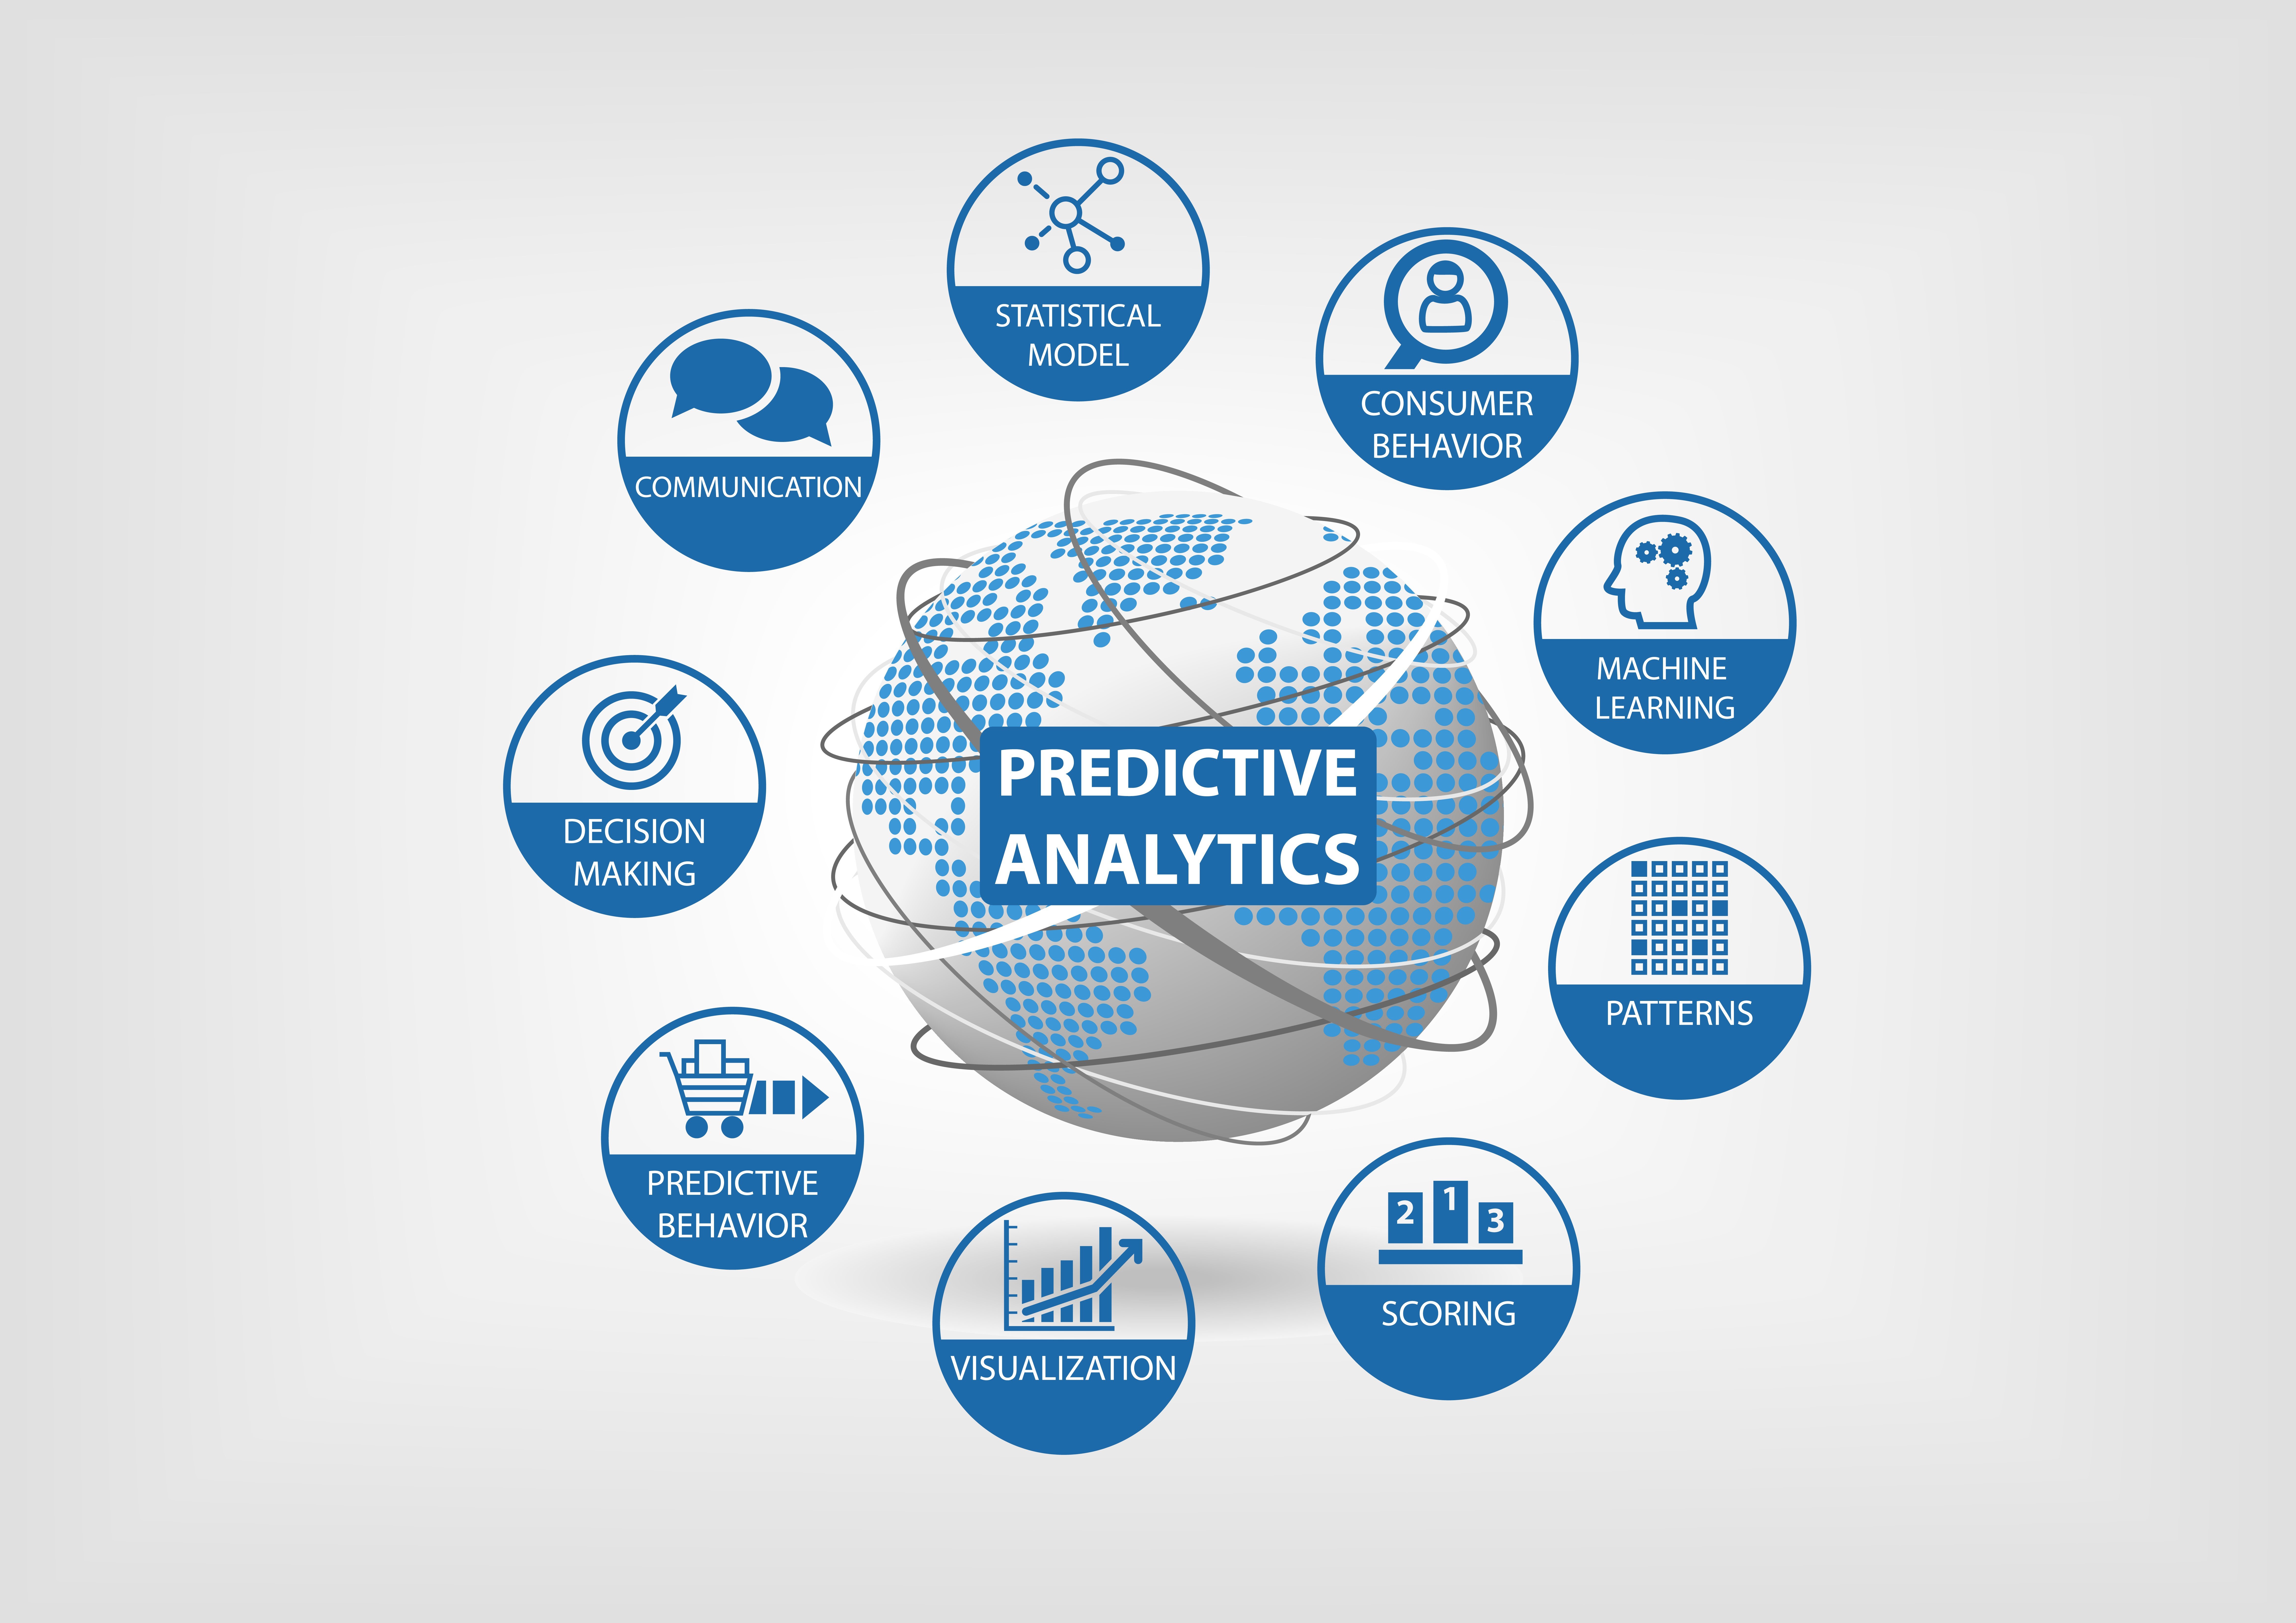 3 Ways to Decrease Your Inventory Cost with Predictive Analytics